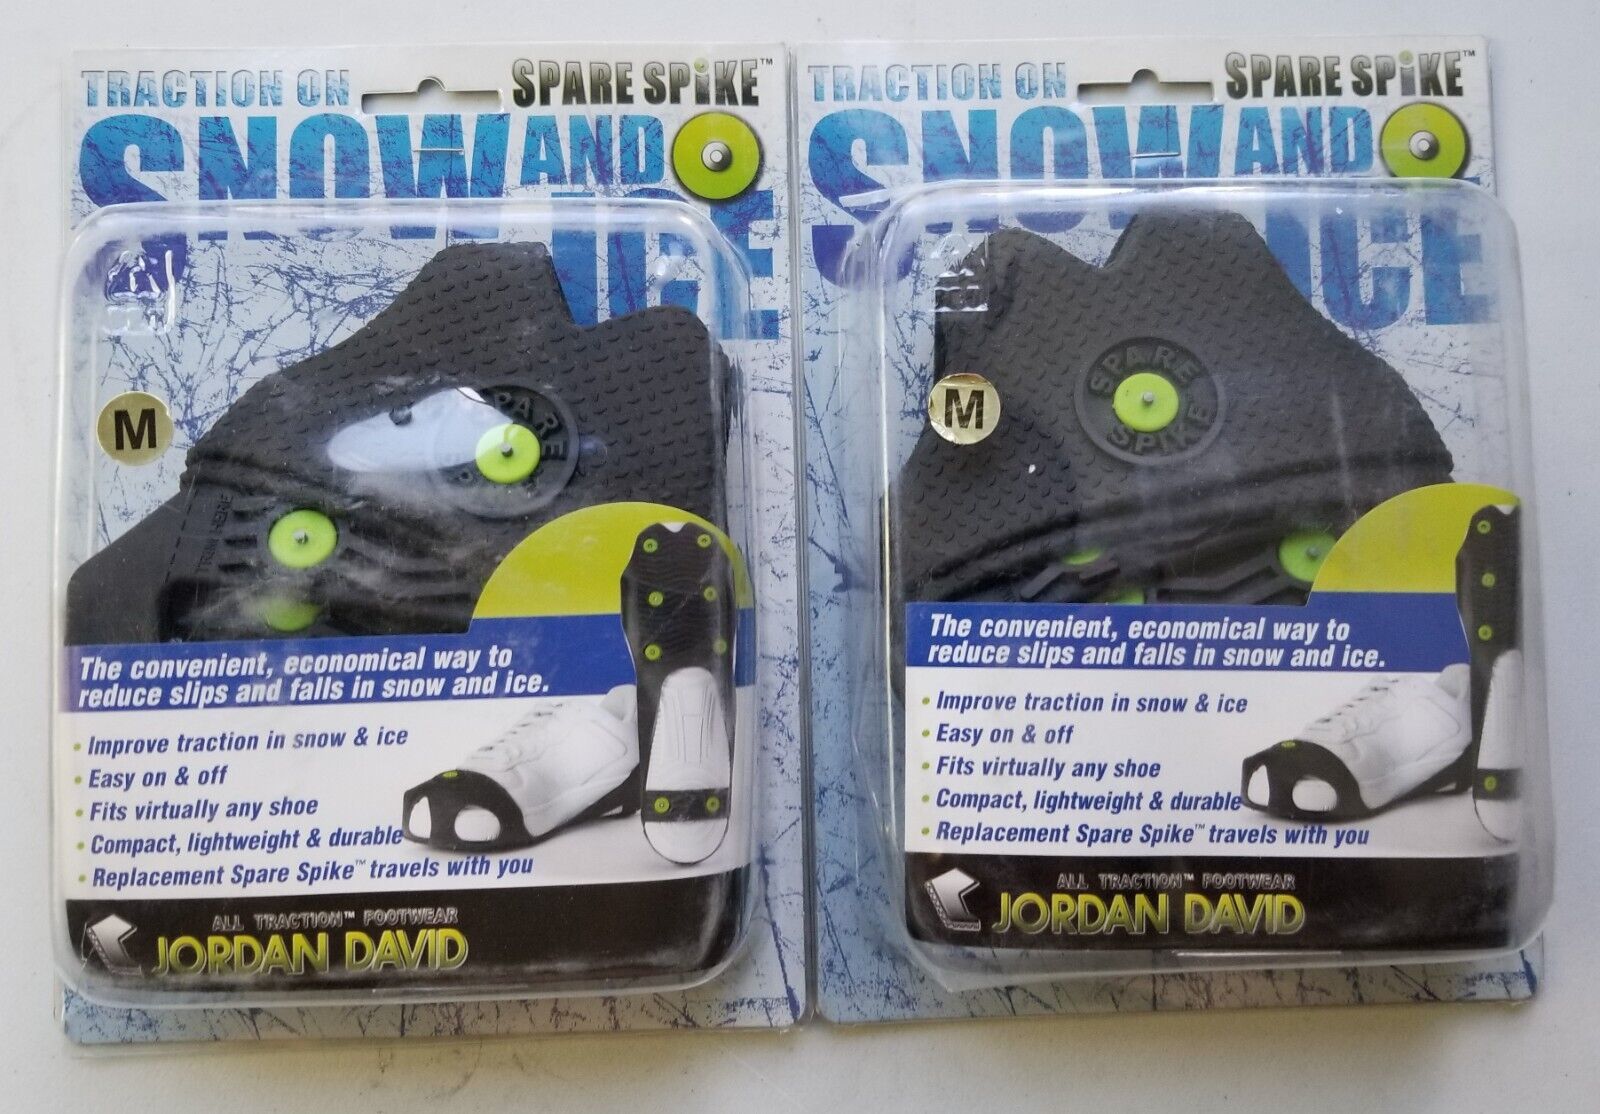 Primary image for 2 Pairs Jordan David Spare Spike™ Snow & Ice Traction Cleats Size Medium.